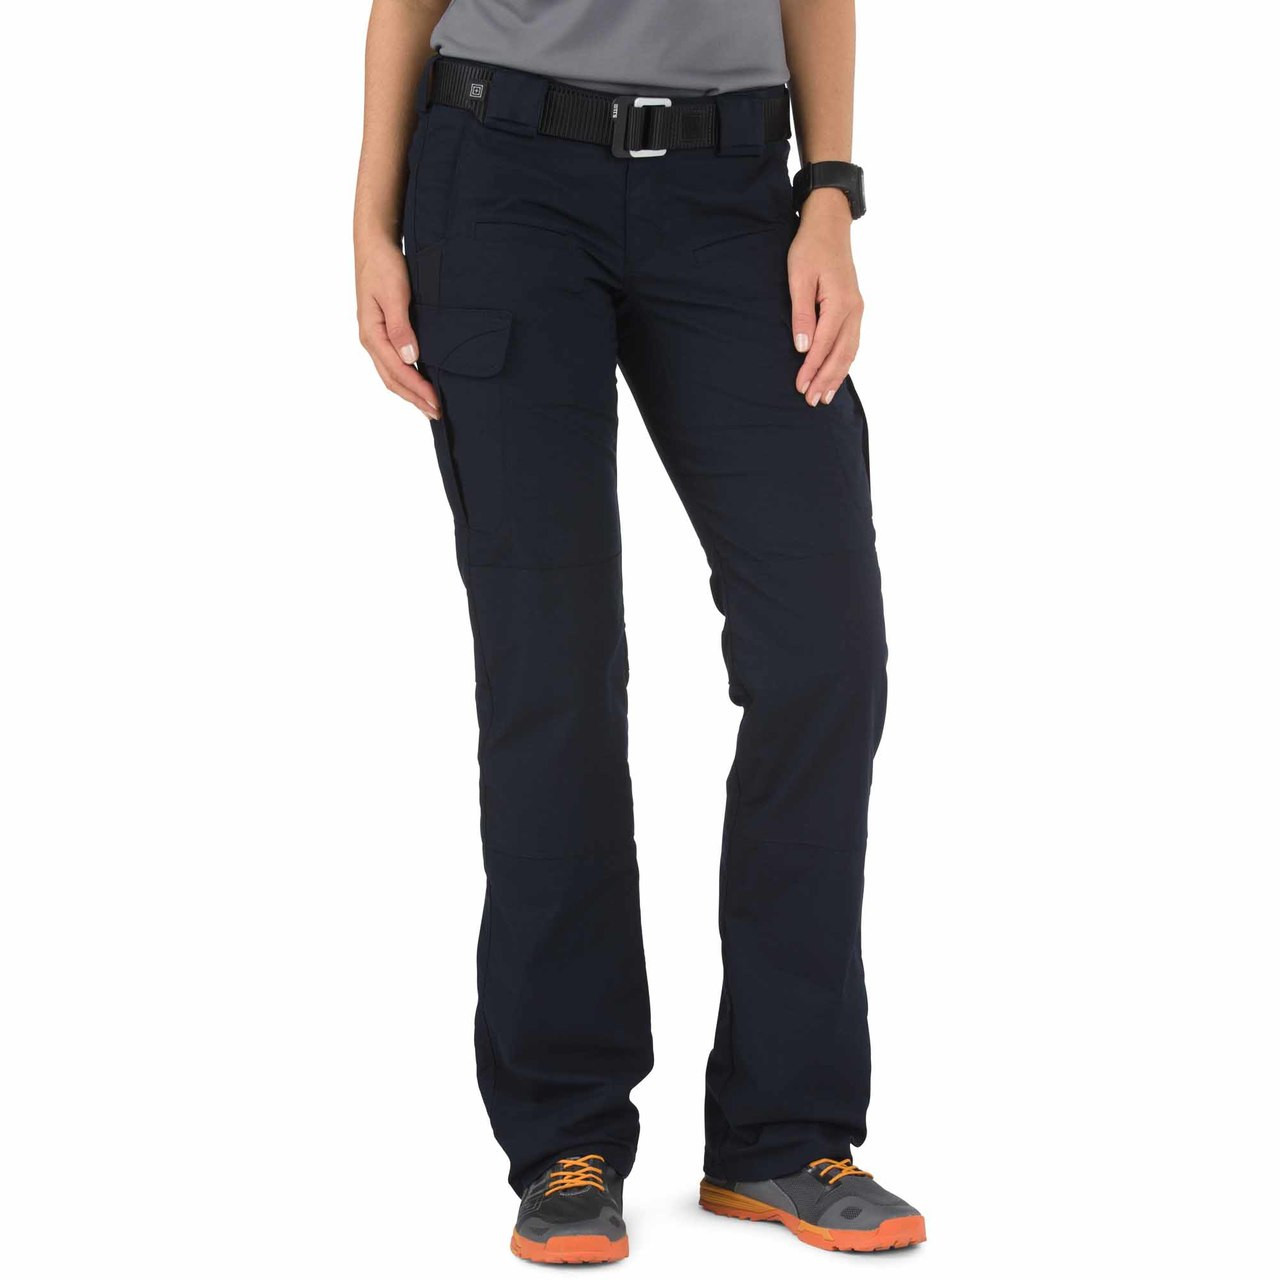 These womens 511 Stryke Pants set the standard for all womens tactical  pants Durable comfortab  Best hiking pants for women Trekking outfit  Pants for women